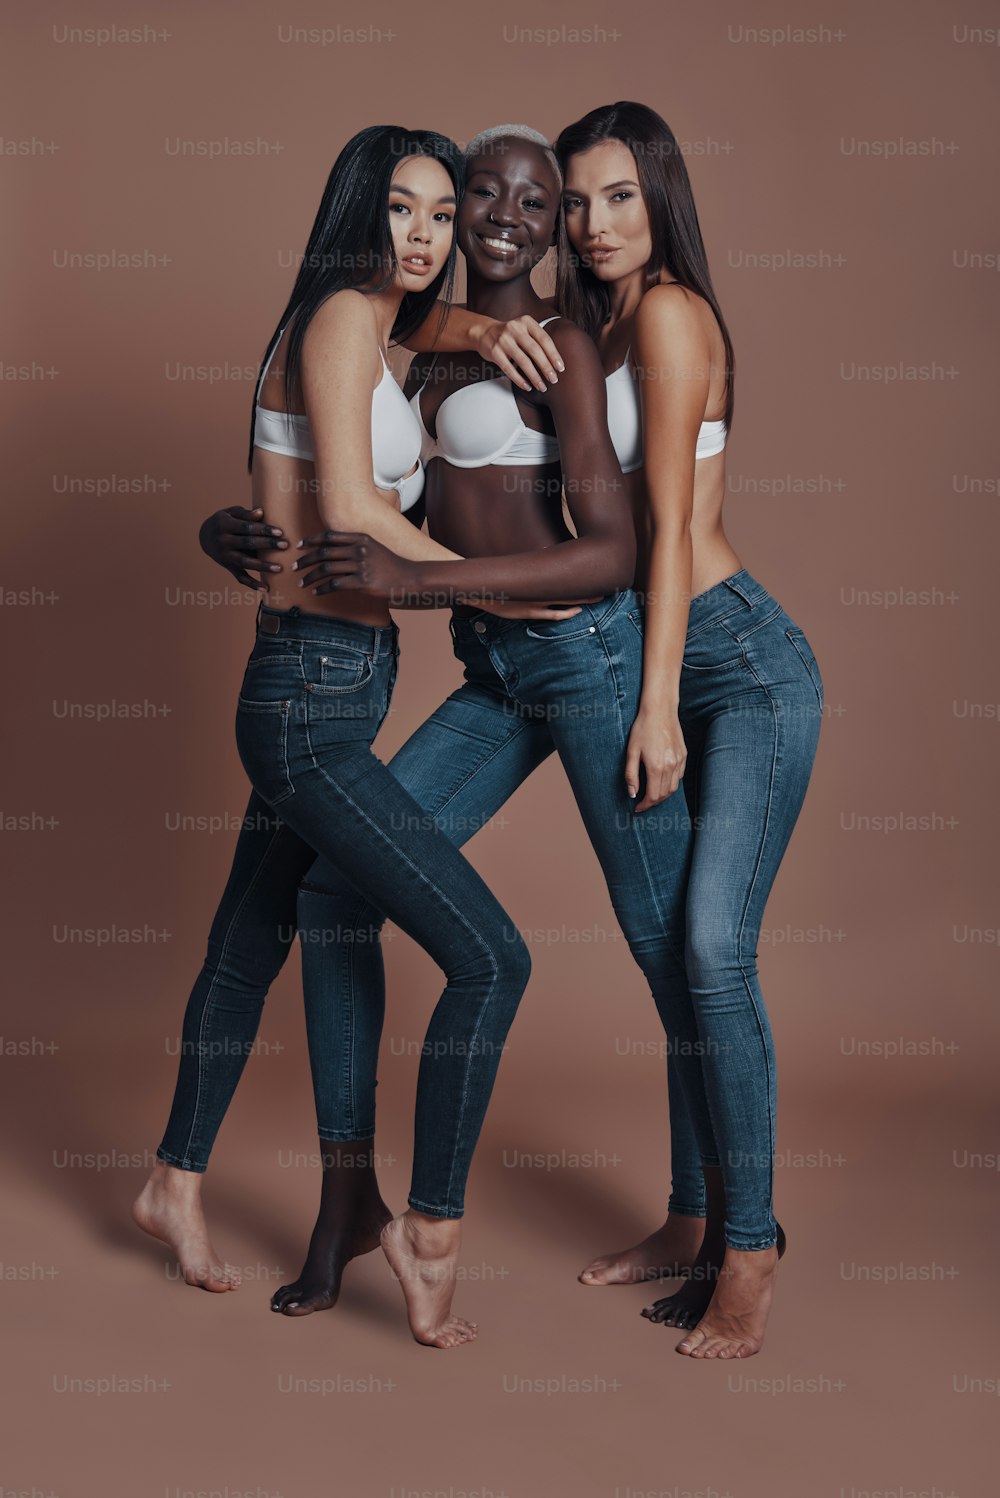 500+ Girl In Jeans Pictures  Download Free Images on Unsplash